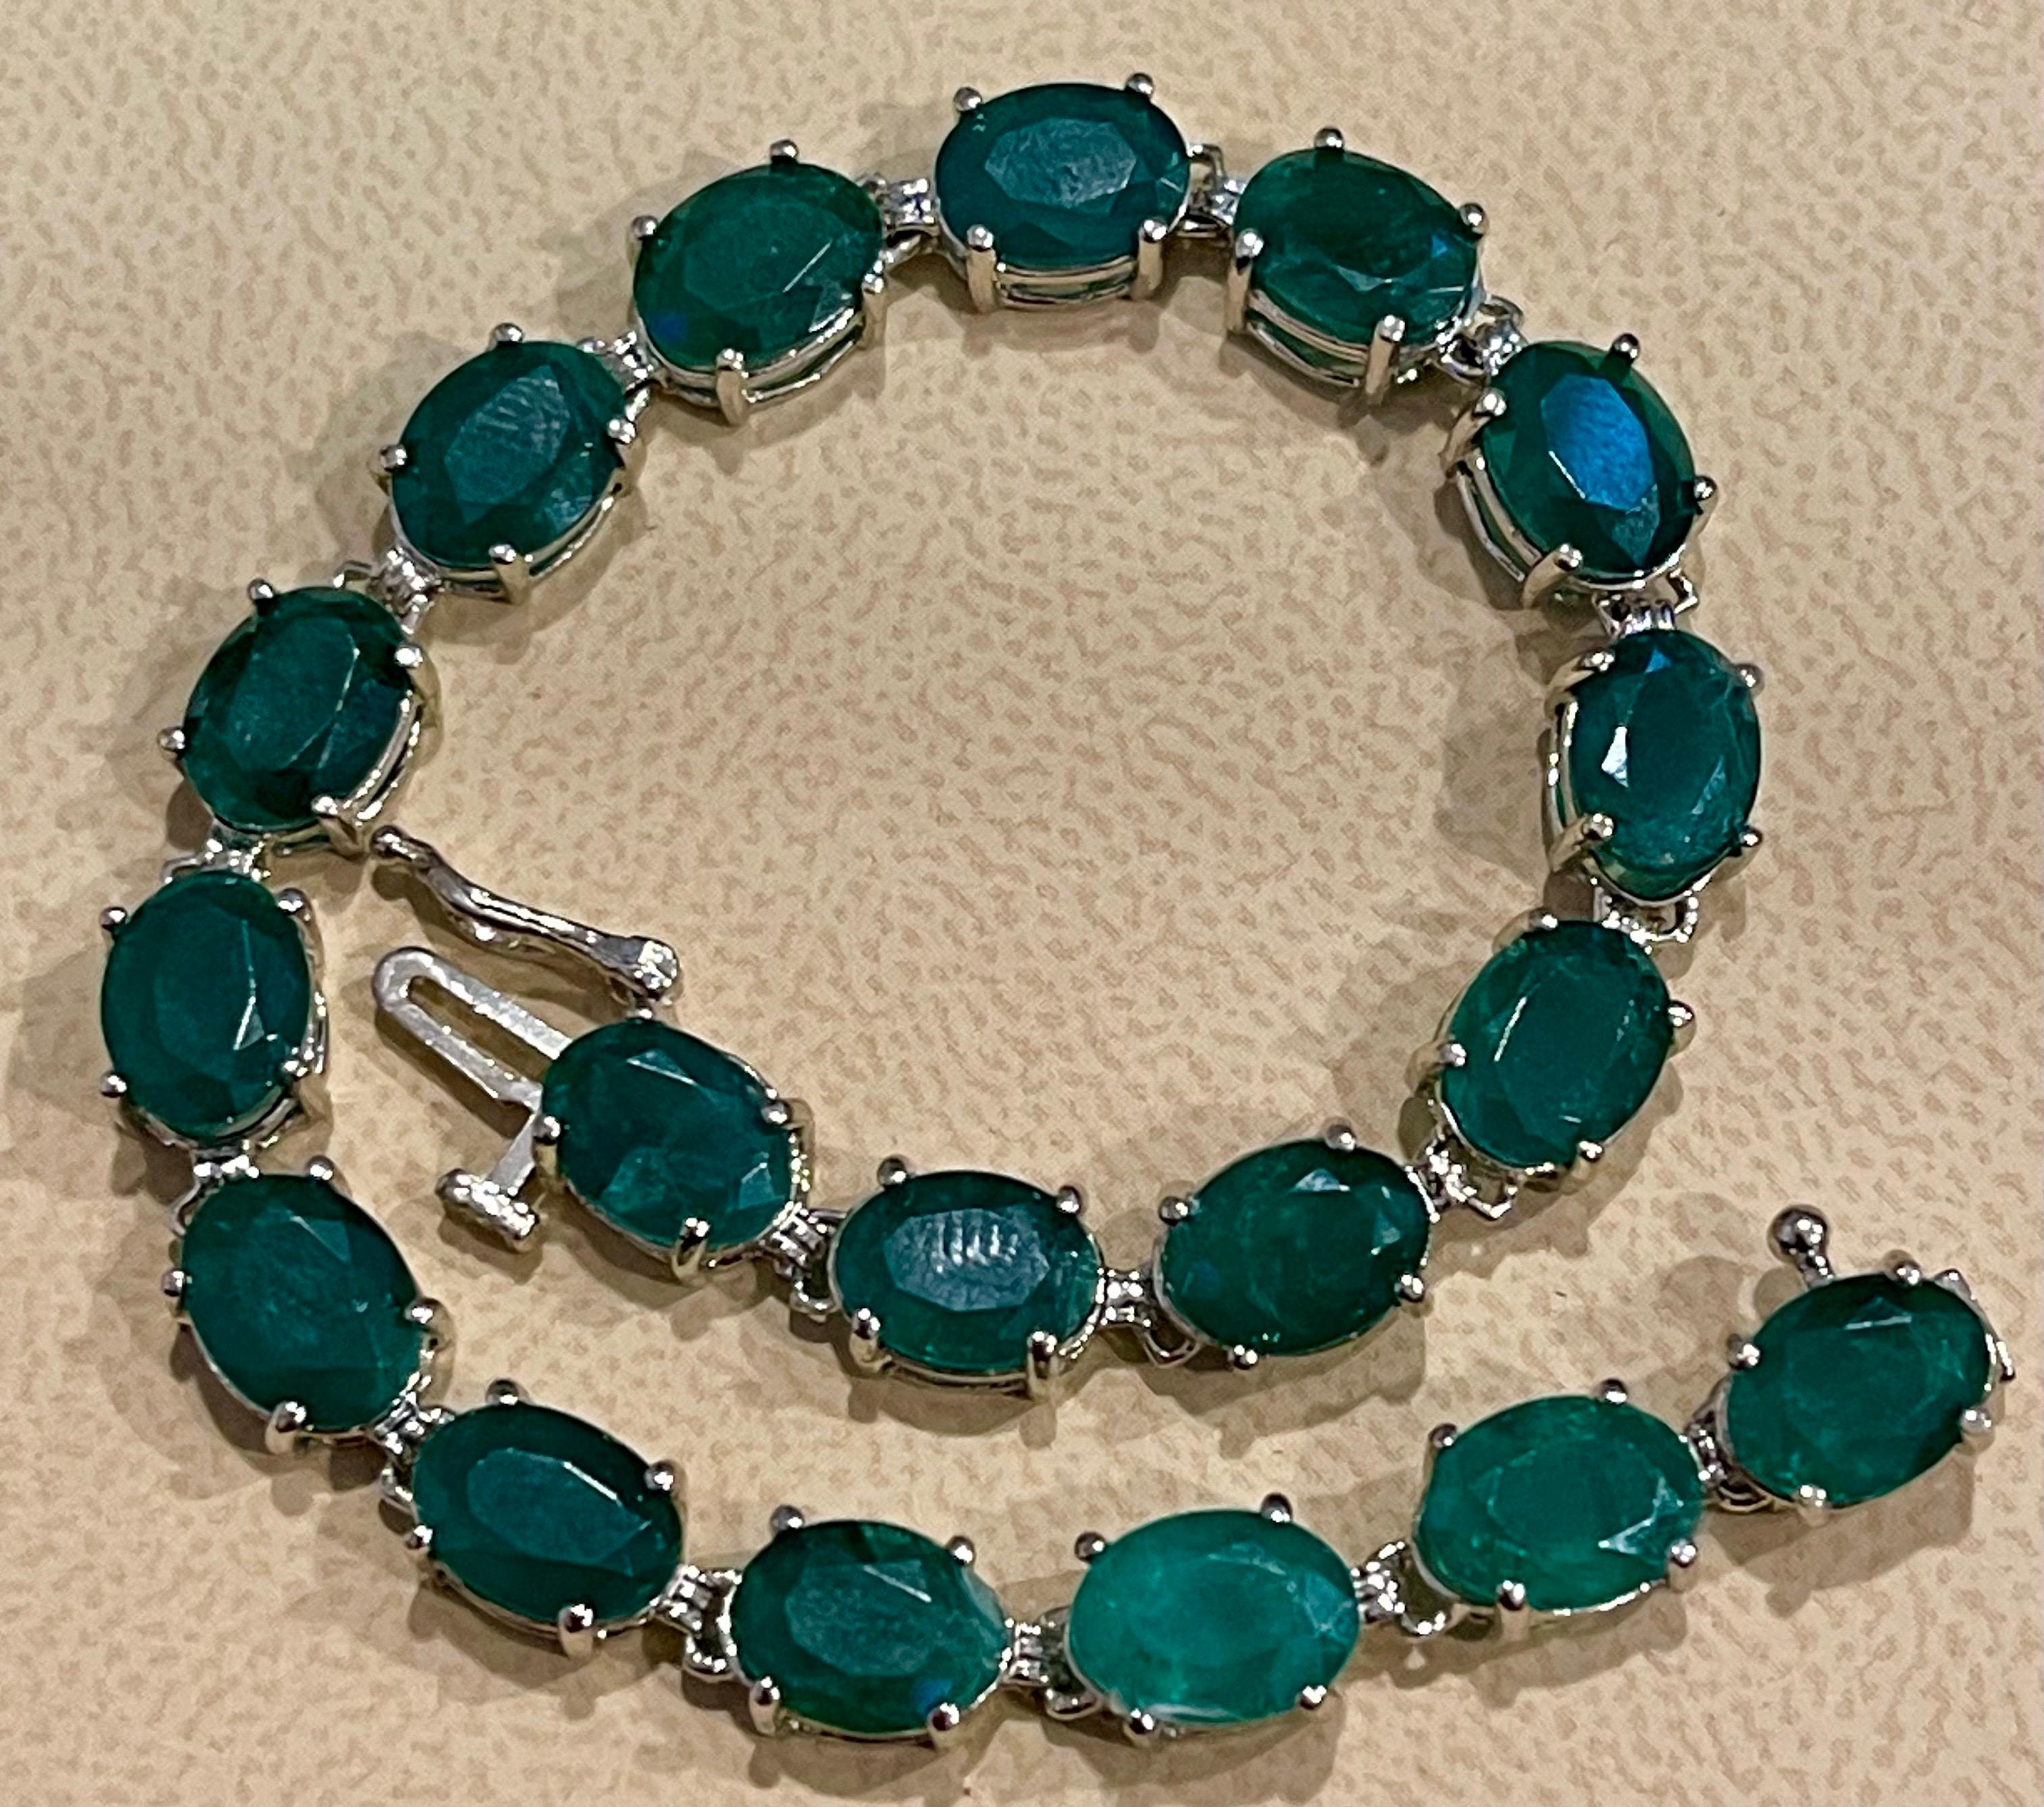 23 Carat Natural Emerald Cocktail Tennis Bracelet 14 Karat White Gold In New Condition For Sale In New York, NY